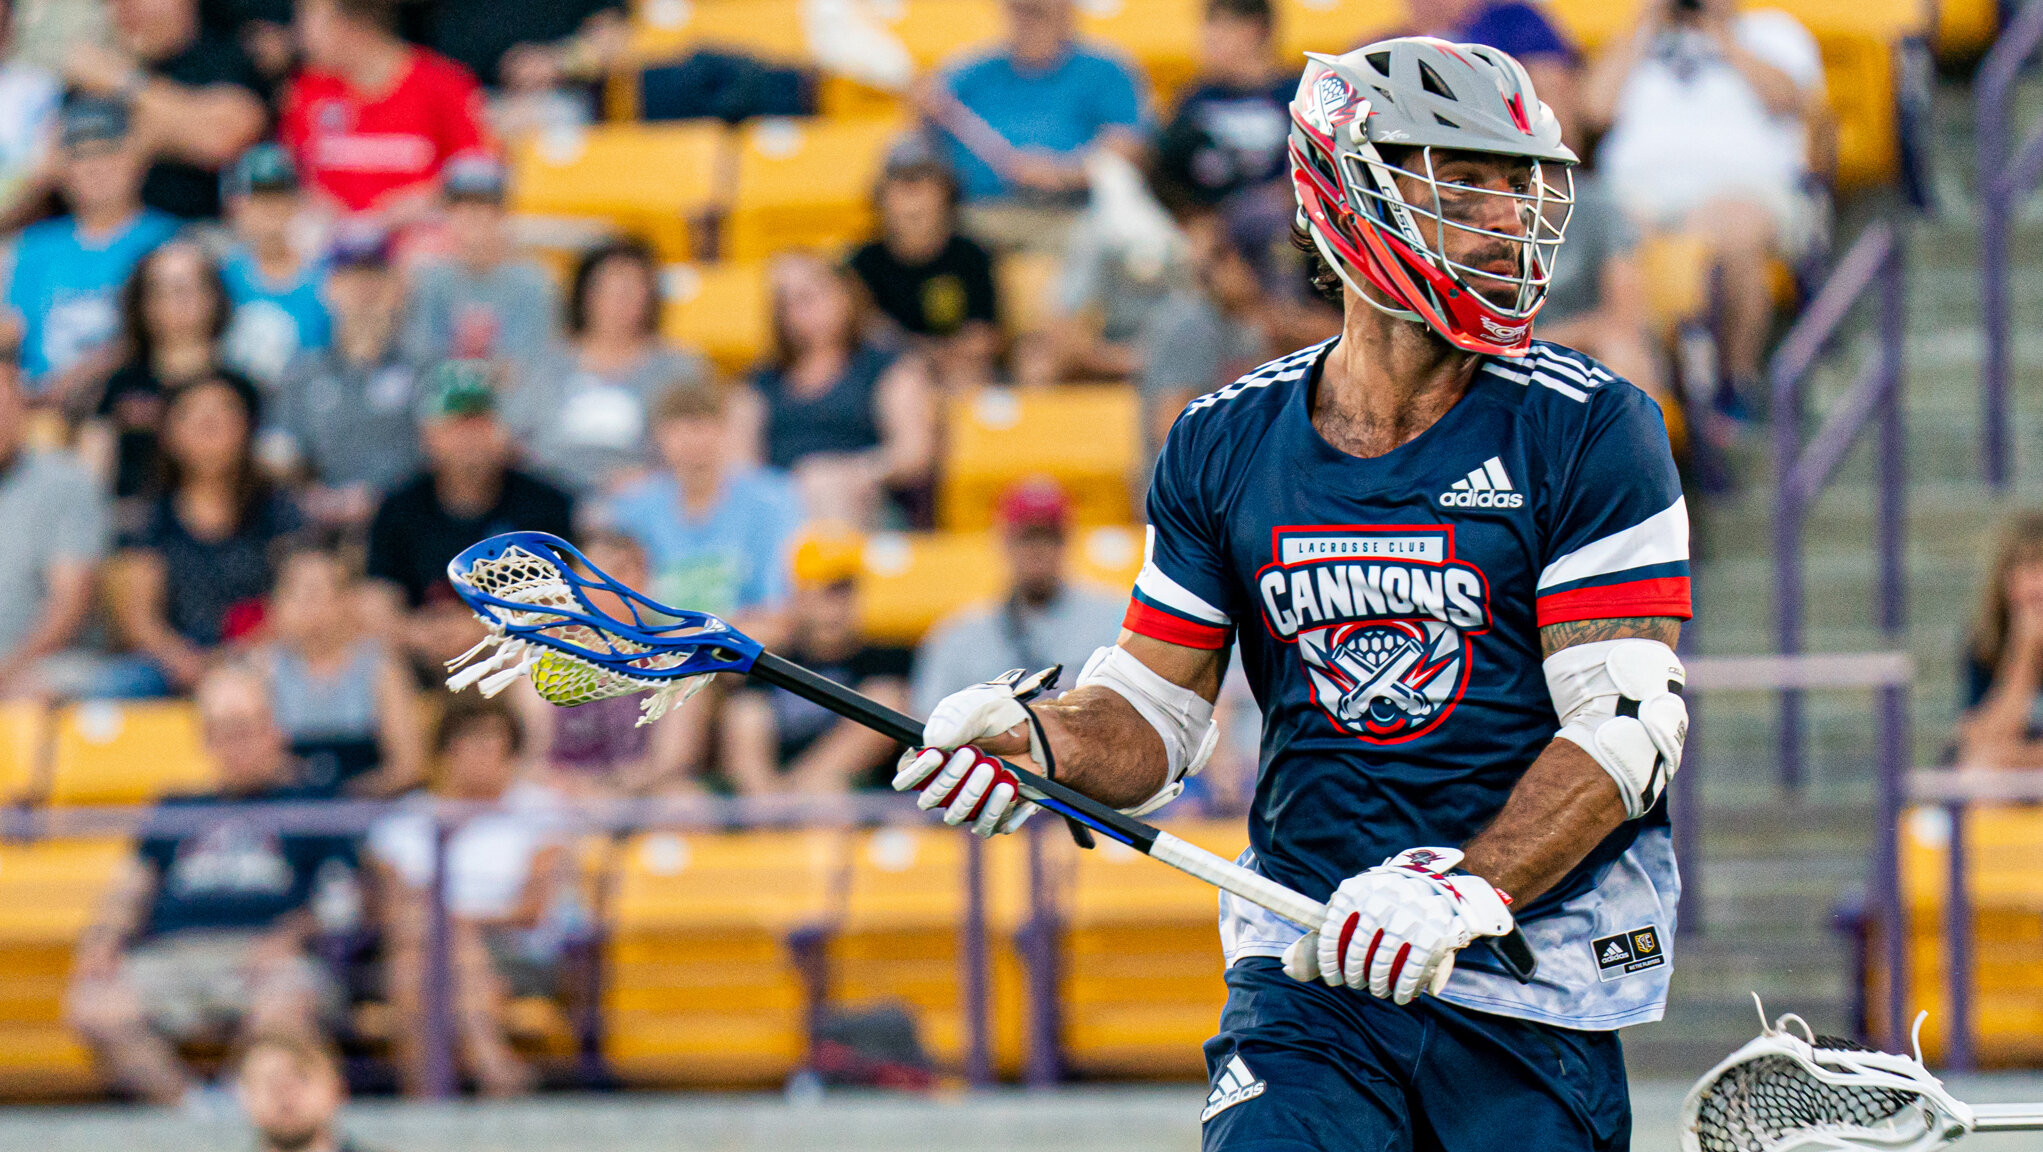 Paul Rabil on X: Gonna make a lot of saves this year. I guarantee